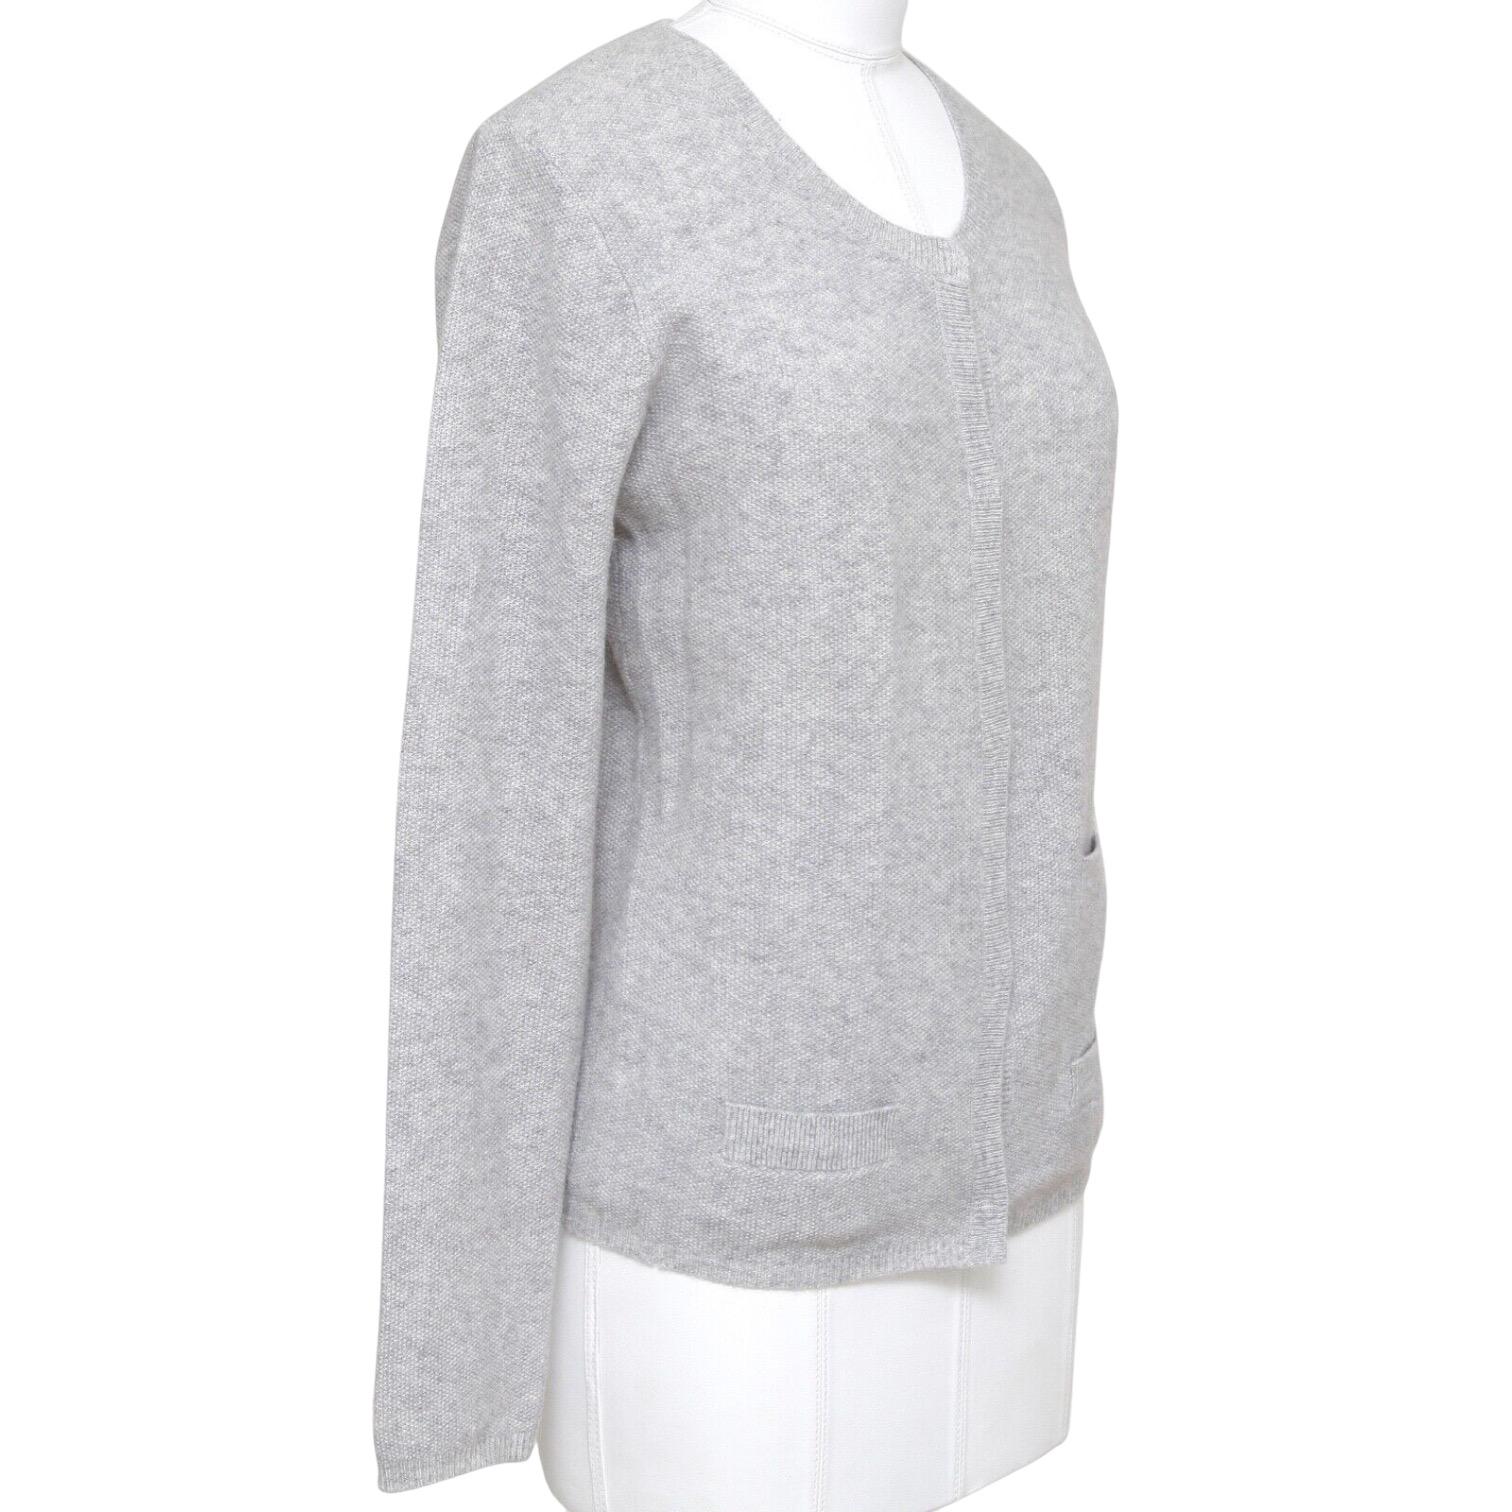 GUARANTEED AUTHENTIC CHLOE SOFT LIGHT GREY CASHMERE CARDIGAN

Details:
- Soft lightweight knit light grey cardigan has a great easy fit.
- Crew neck, front covered snap closure.
- Front slip pockets.
- Easy great piece for your Chloe